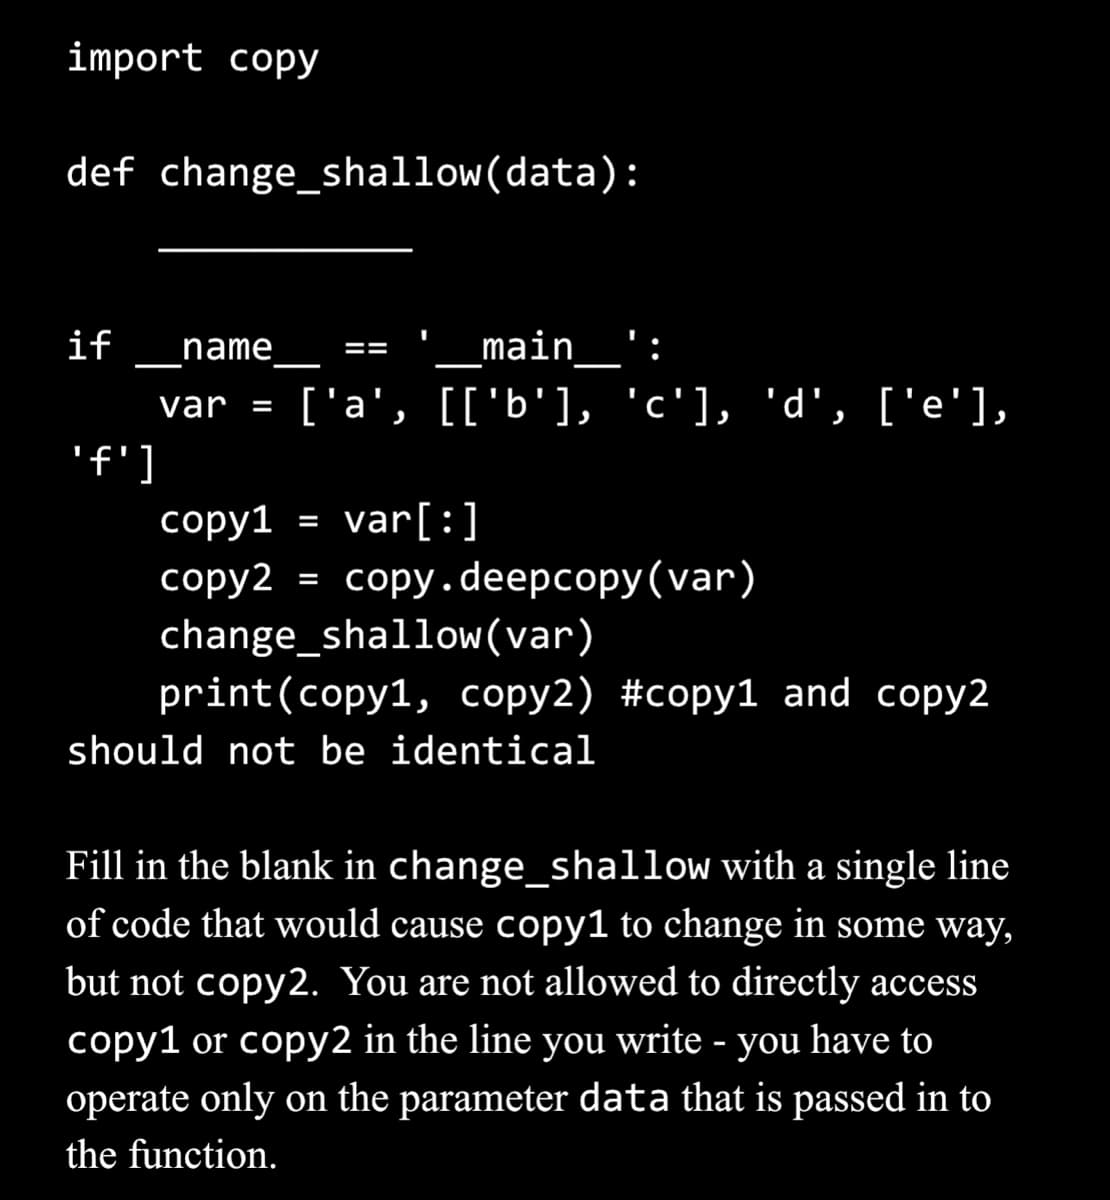 import copy
def change_shallow(data):
if name
var =
'f']
main':
['a', [['b'], 'c'], 'd', ['e'],
==
copy1
var[:]
copy2 = copy.deepcopy (var)
change_shallow (var)
print (copy1, copy2) #copy1 and copy2
should not be identical
=
Fill in the blank in
change_shallow with a single line
of code that would cause copy1 to change in some way,
but not copy2. You are not allowed to directly access
copy1 or copy2 in the line you write - you have to
operate only on the parameter data that is passed in to
the function.